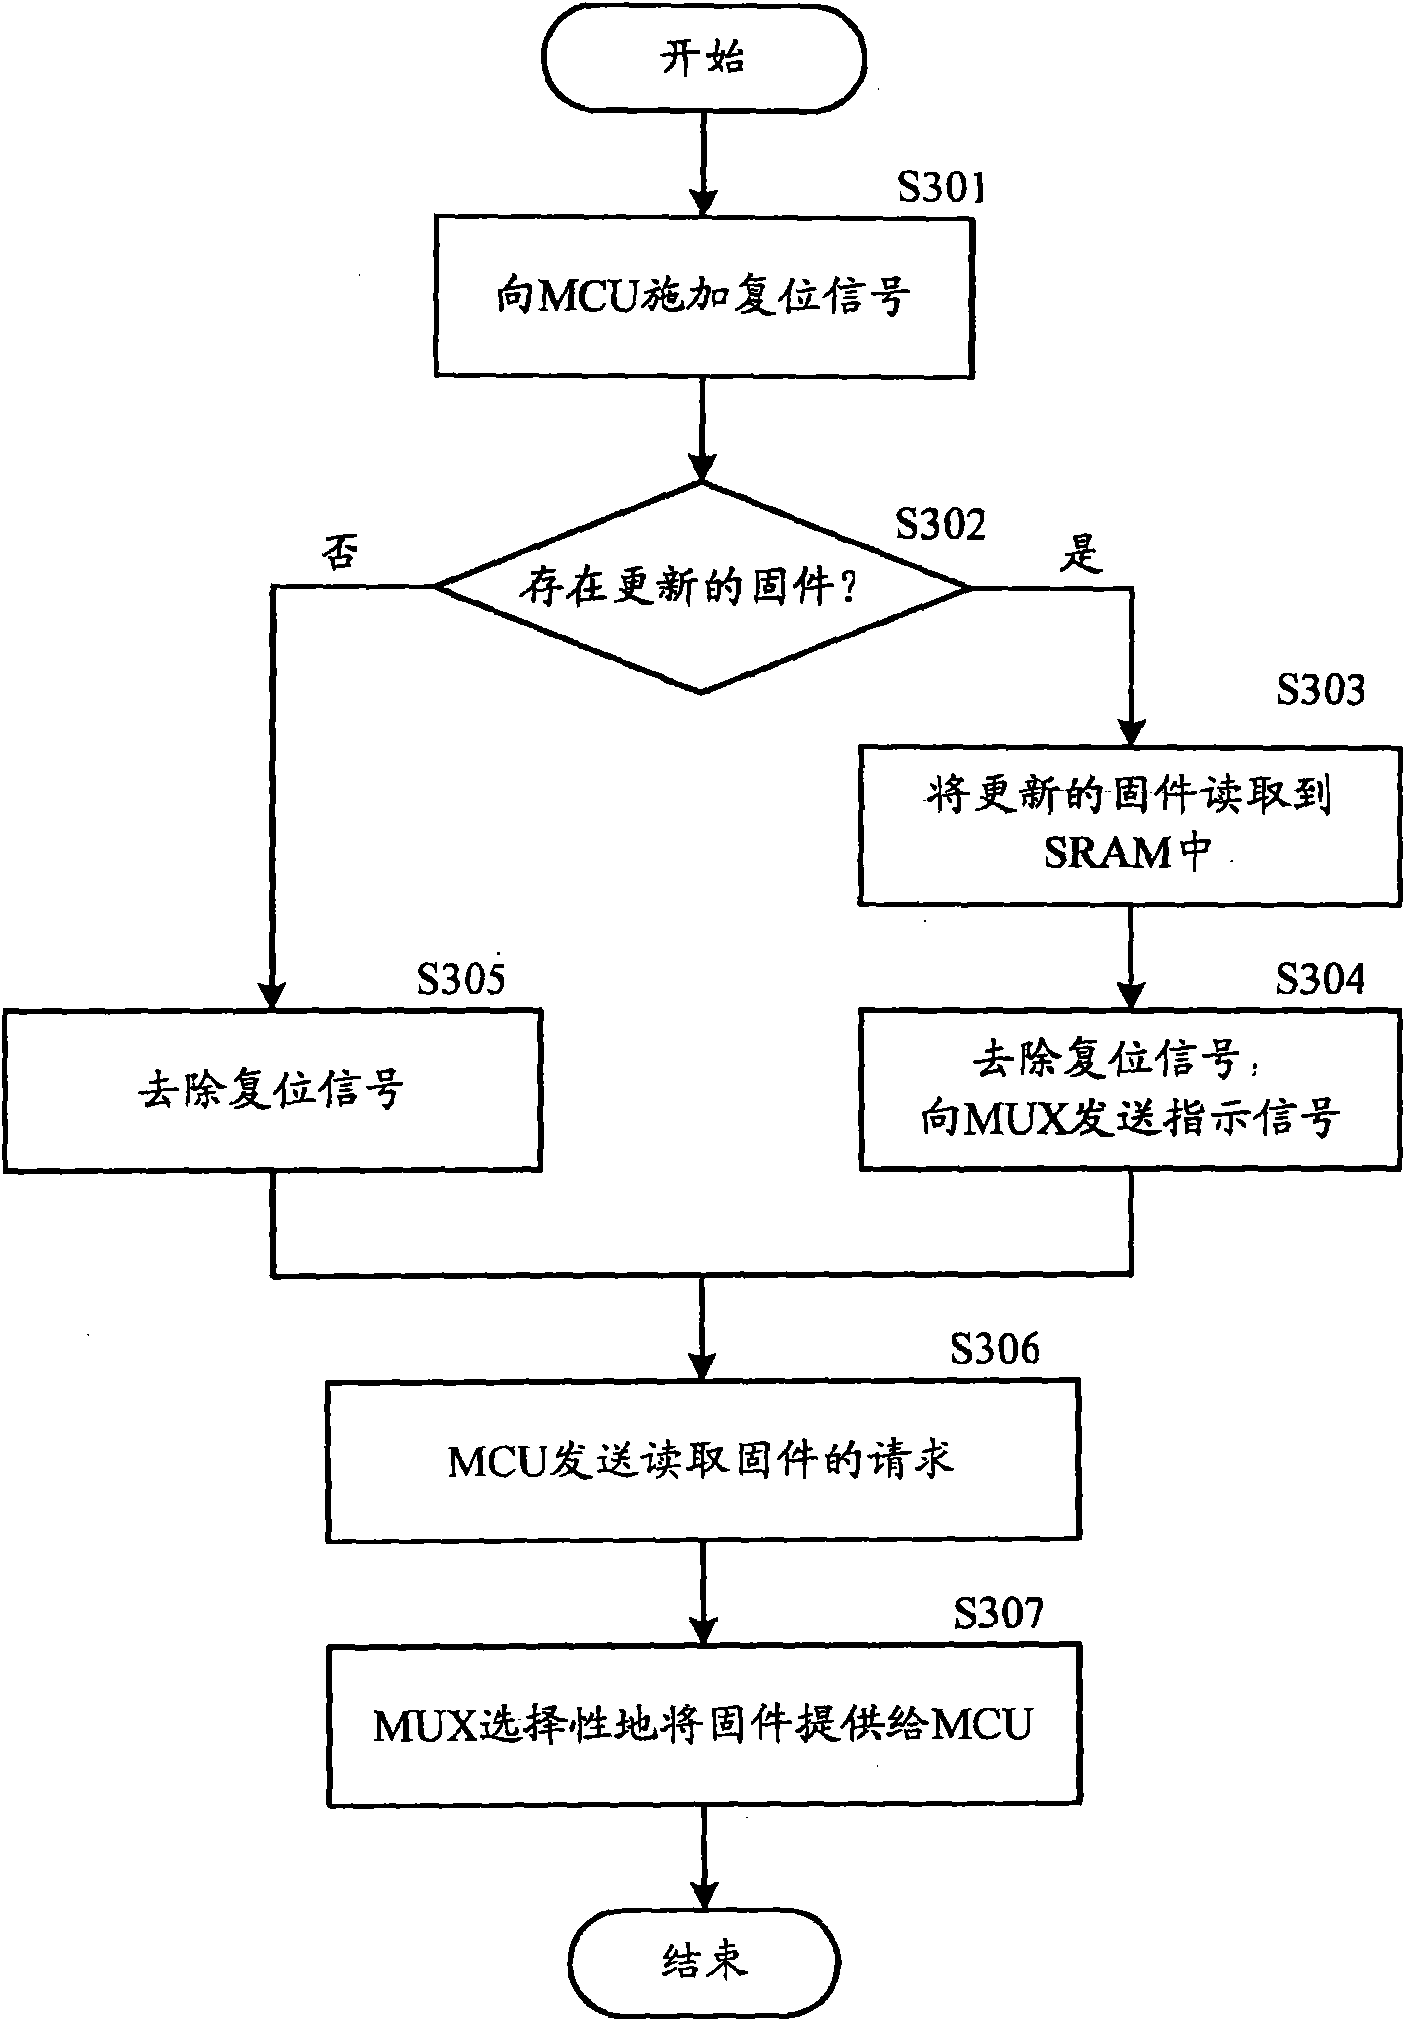 Method for updating firmware and chip updating firmware by using same